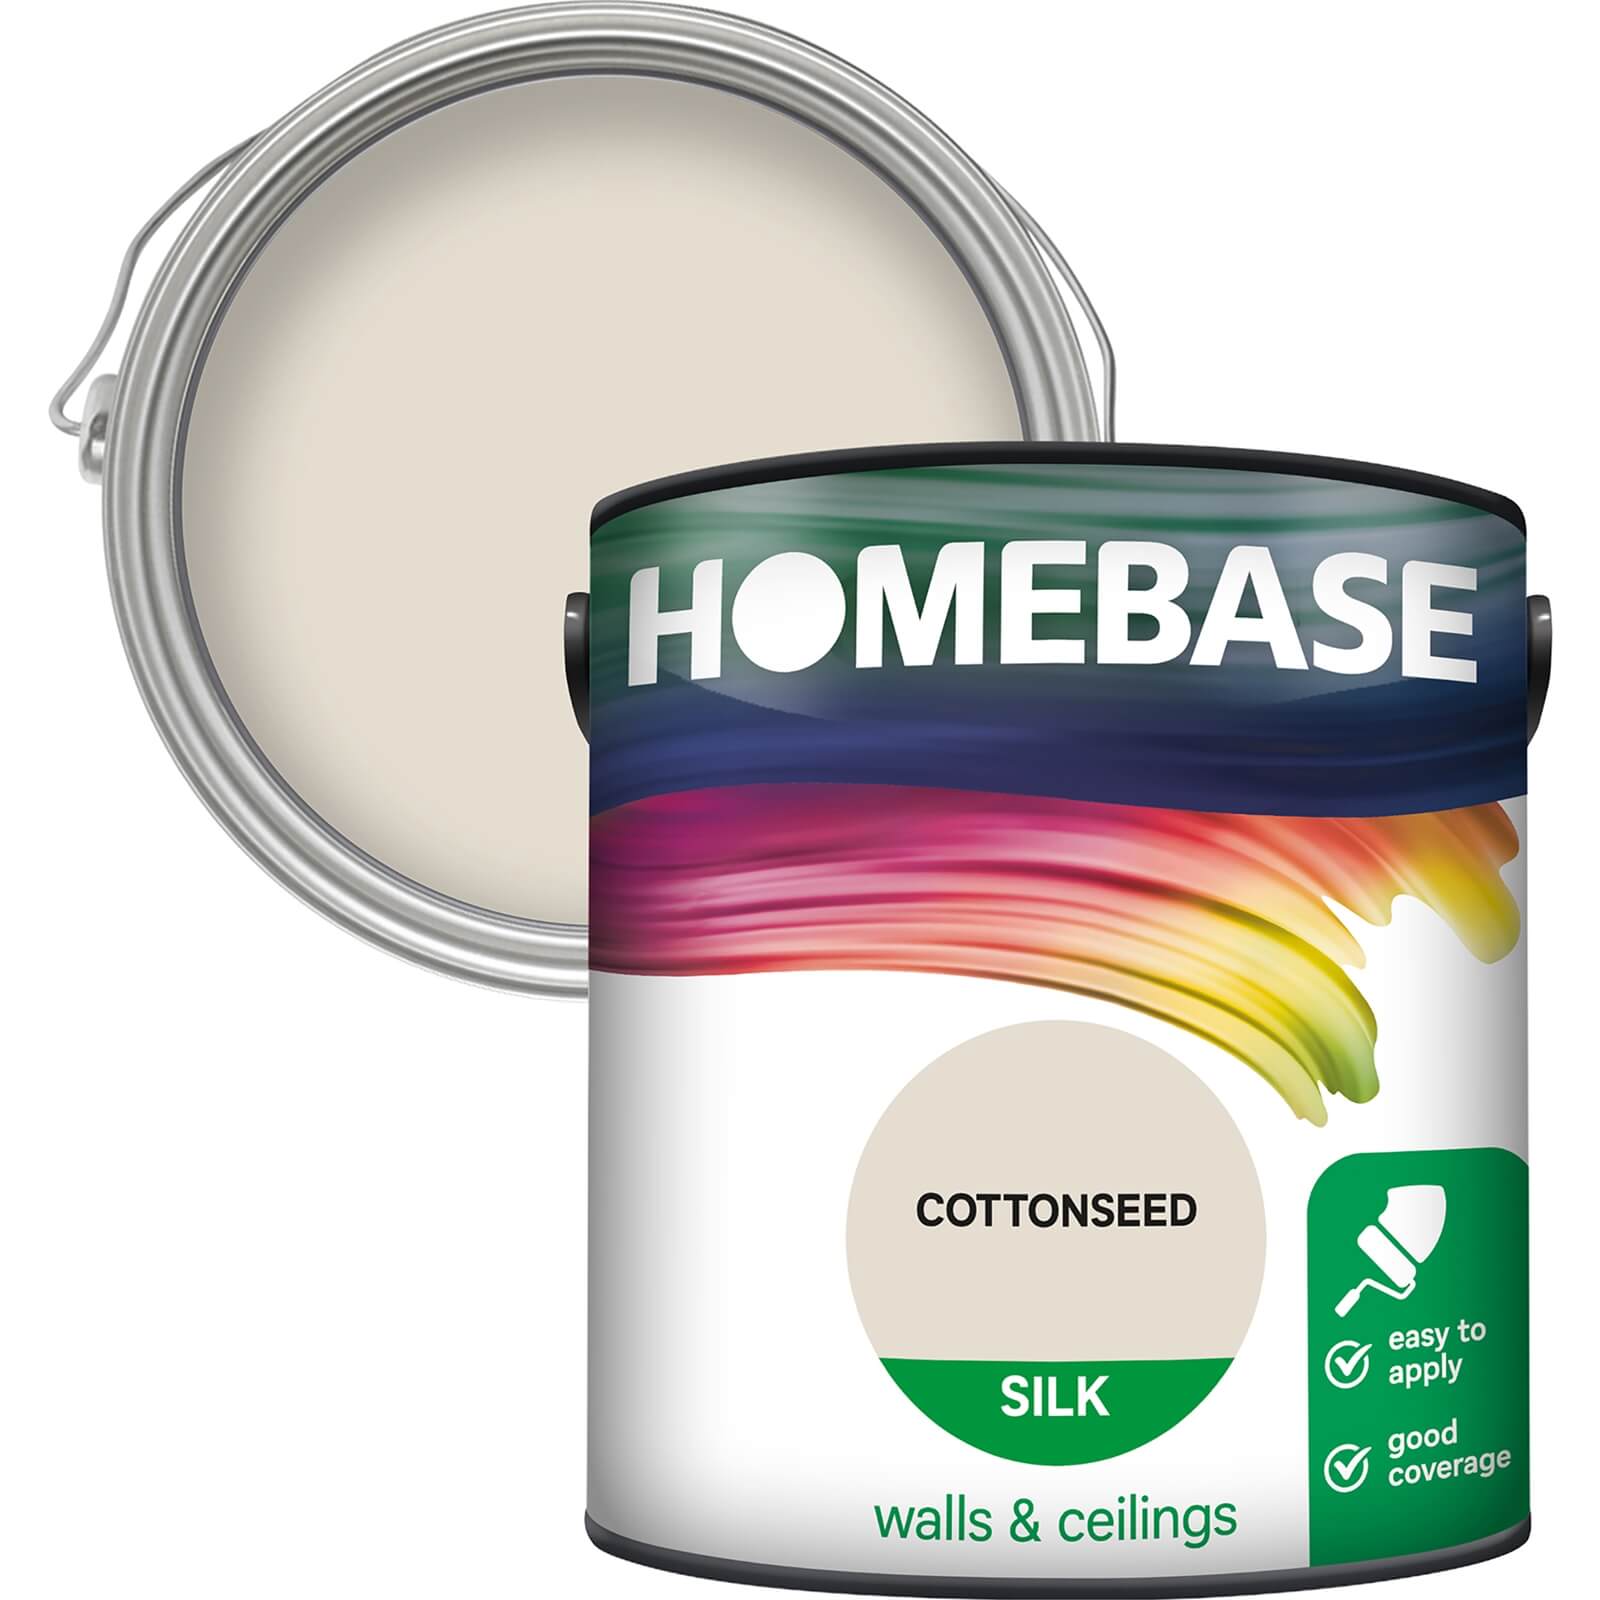 Homebase Silk Emulsion Paint Cottonseed - 2.5L